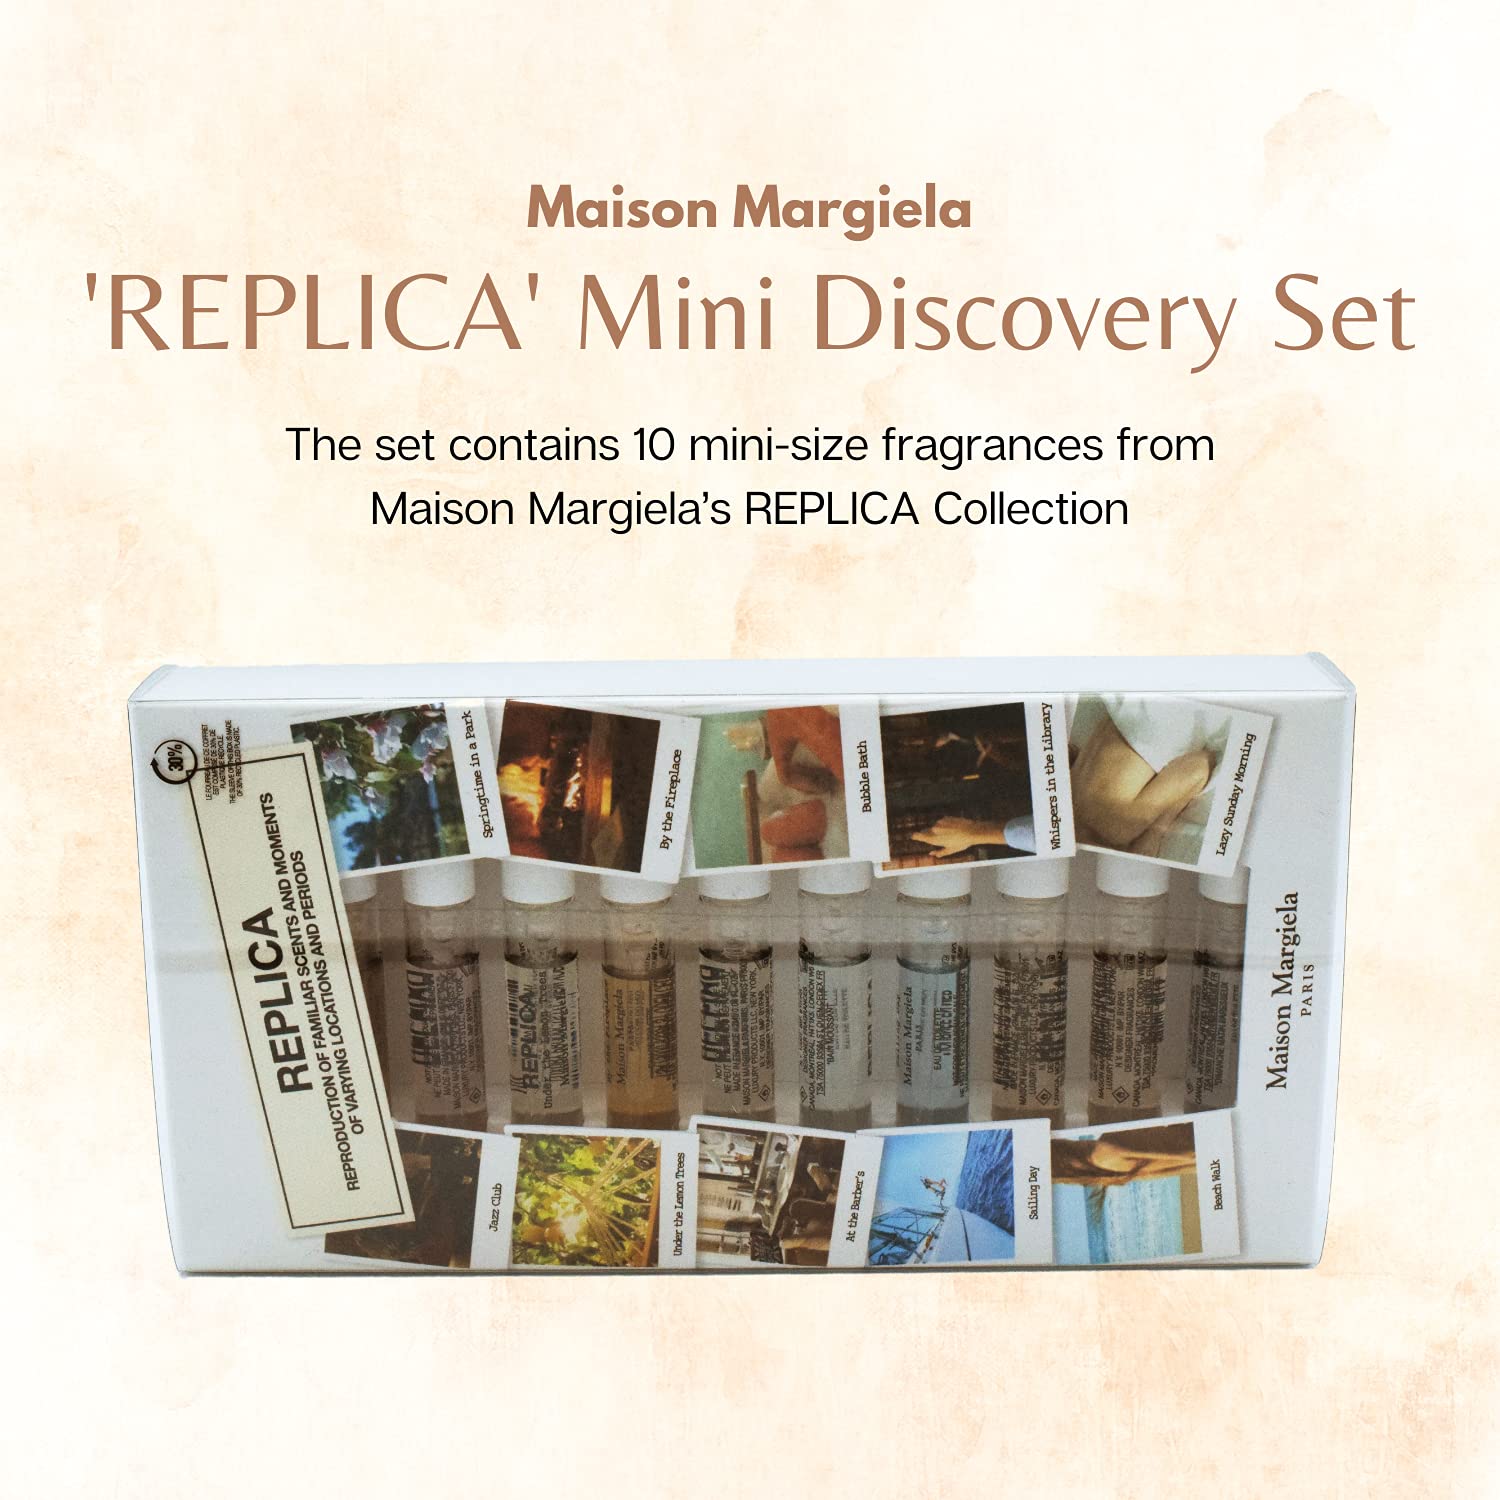 Maison Margiela Replica Memory Discovery 10 Vial Parfum Sampler Set - By The Fireplace, Jazz Club, Under the Lemon, Whispers In Library, Bubble Bath, Lazy Sunday Morning, Springtime In Park, Beach Walk, At the Barber's